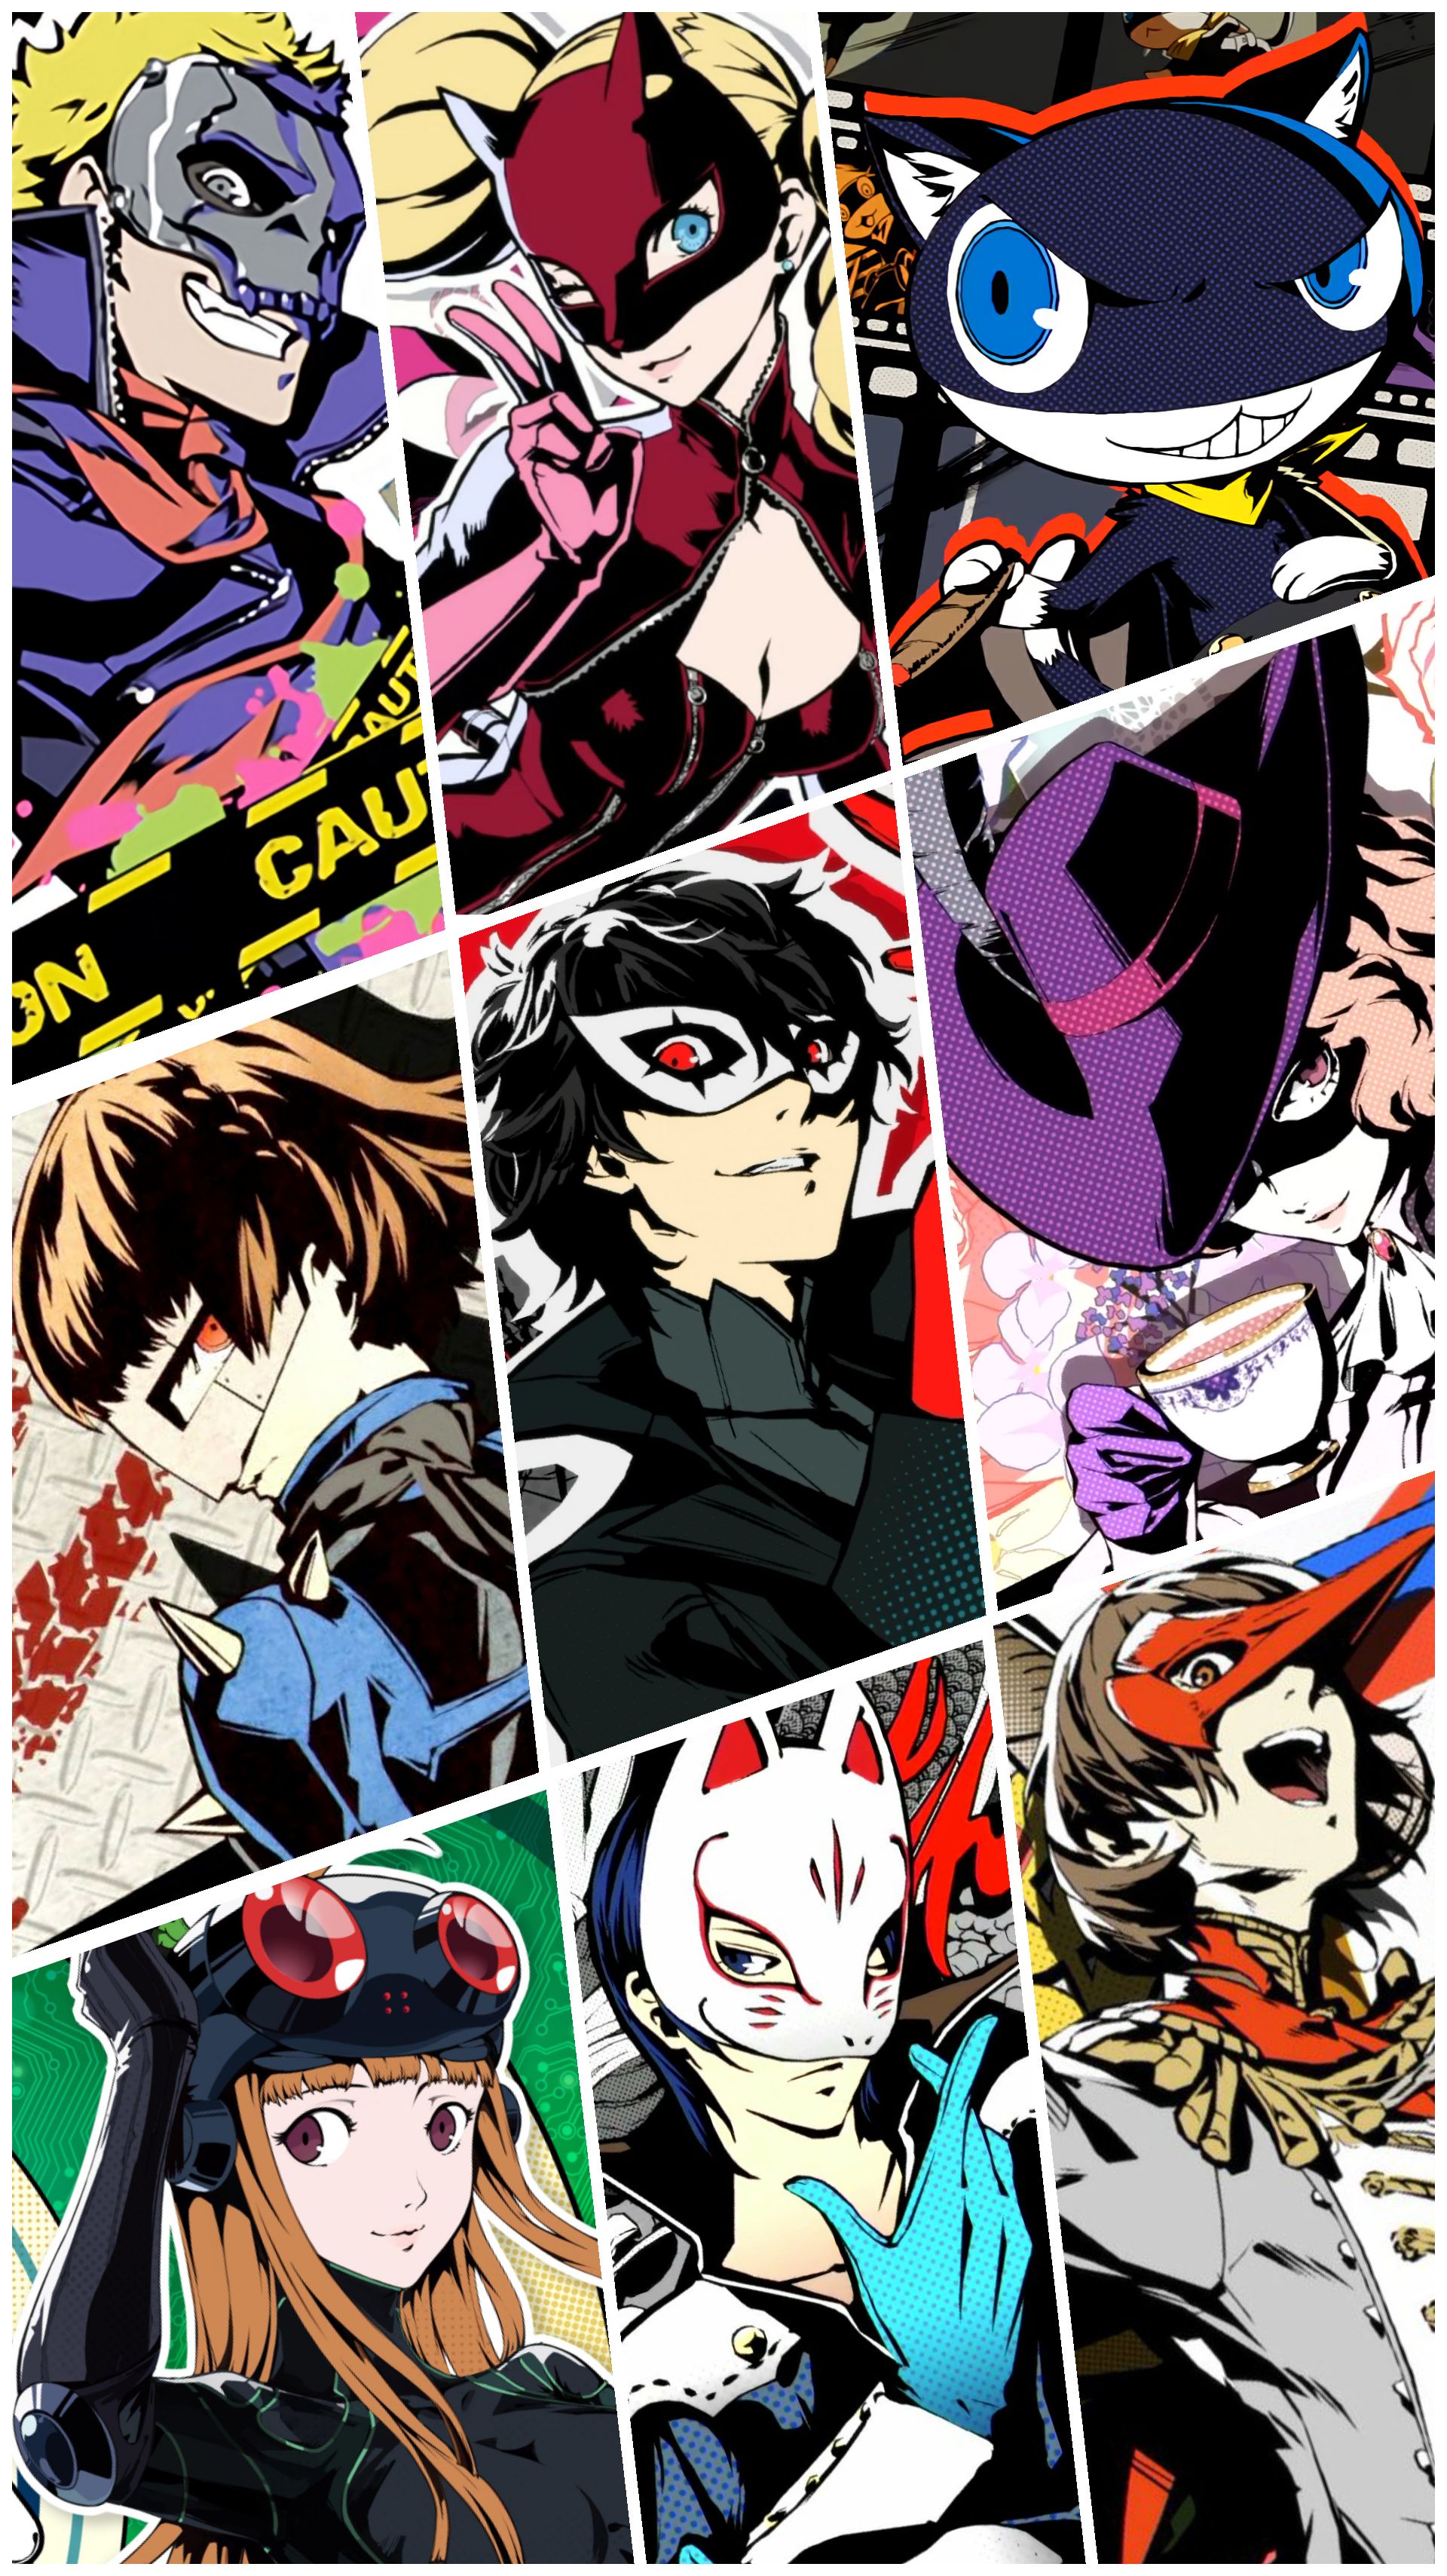 Made a phone wallpaper of all the phantom thieves